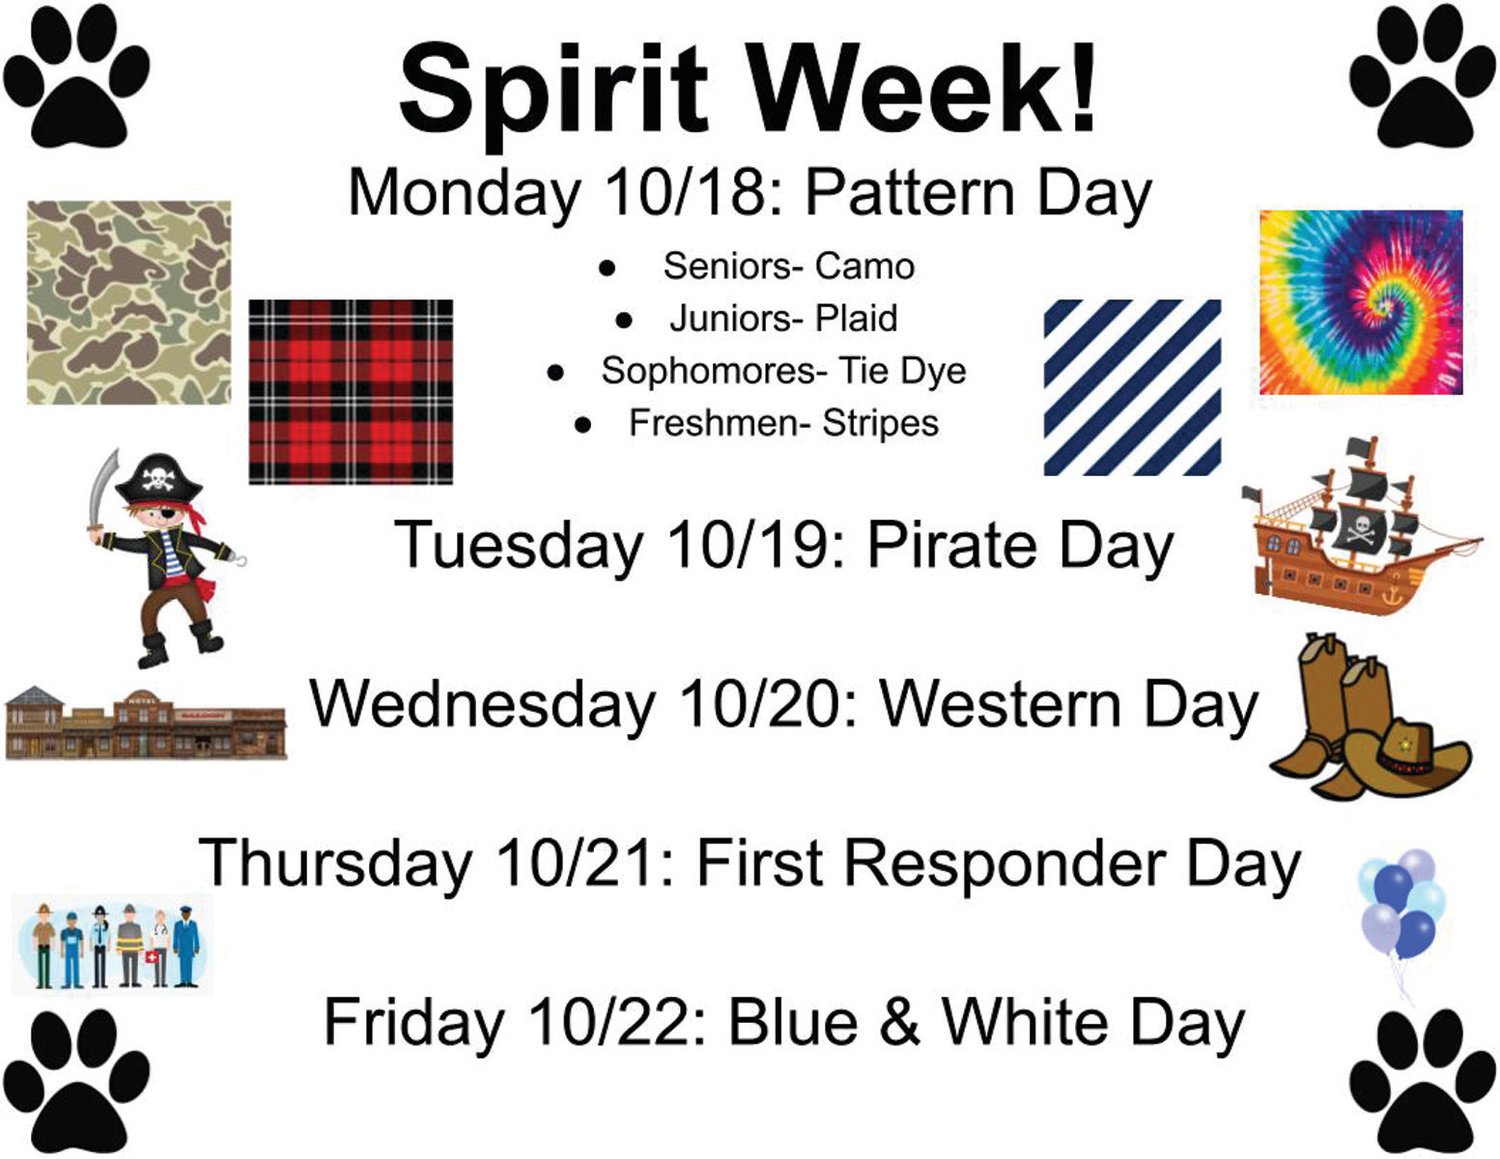 This year’s spirit days at Johnston High were as follows: Monday, Oct. 18, Pattern Day (Seniors: Camo, Juniors: Plaid, Sophomores: Tie Dye, Freshmen: Stripes); Tuesday, Oct. 19, Pirate Day; Wednesday, Oct. 20, Western Day; Thursday, Oct. 21, First Responder Day; Friday, Oct. 22, Blue & White Day.